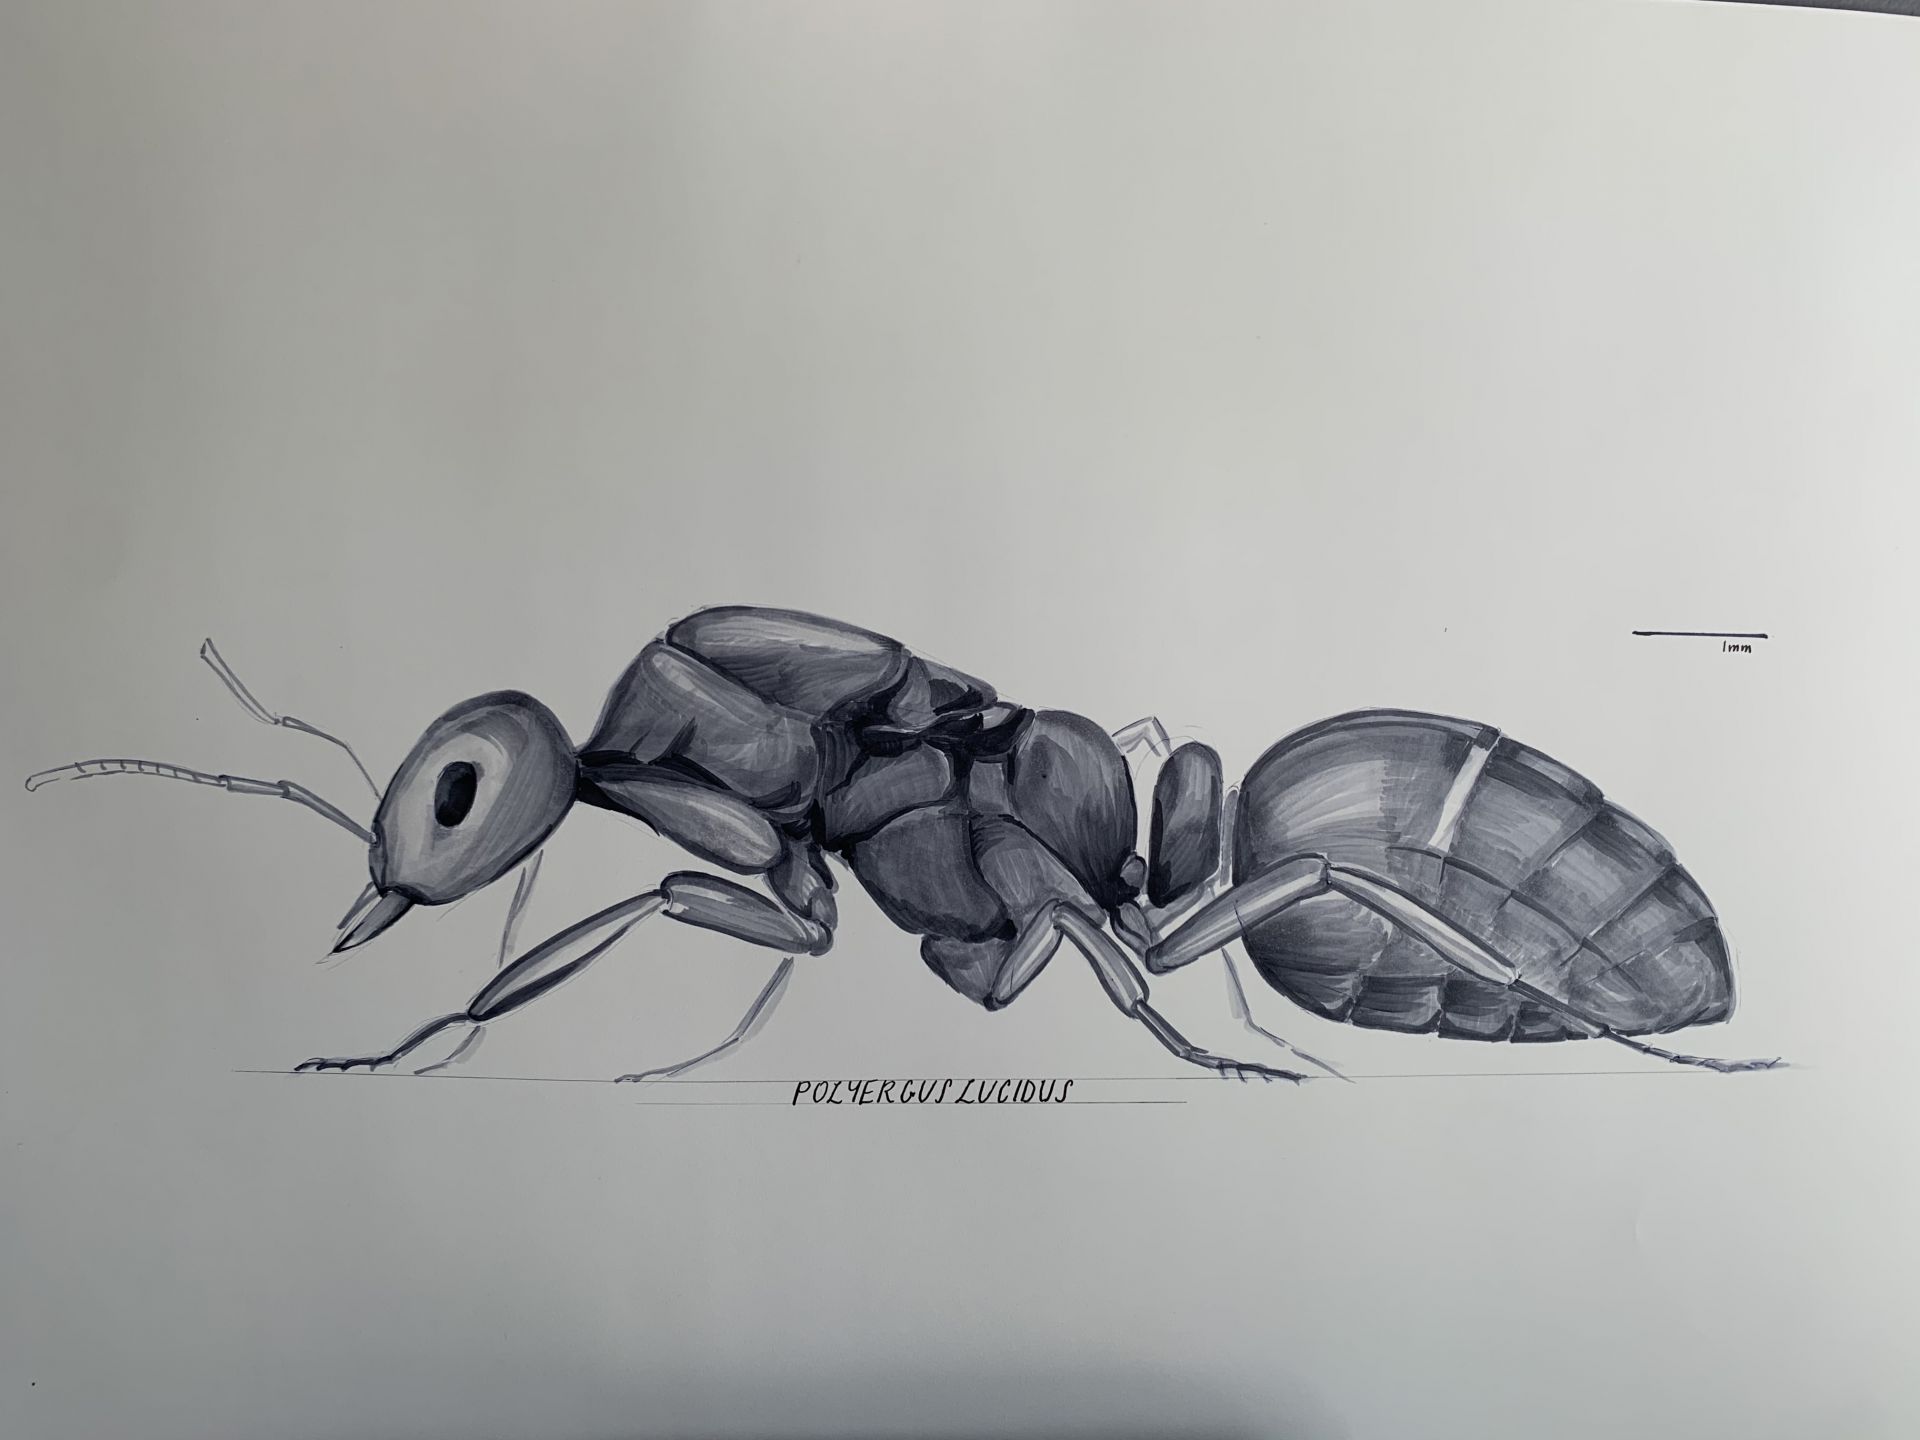 Would you buy ant drawings? - General Market Place - Ants & Myrmecology